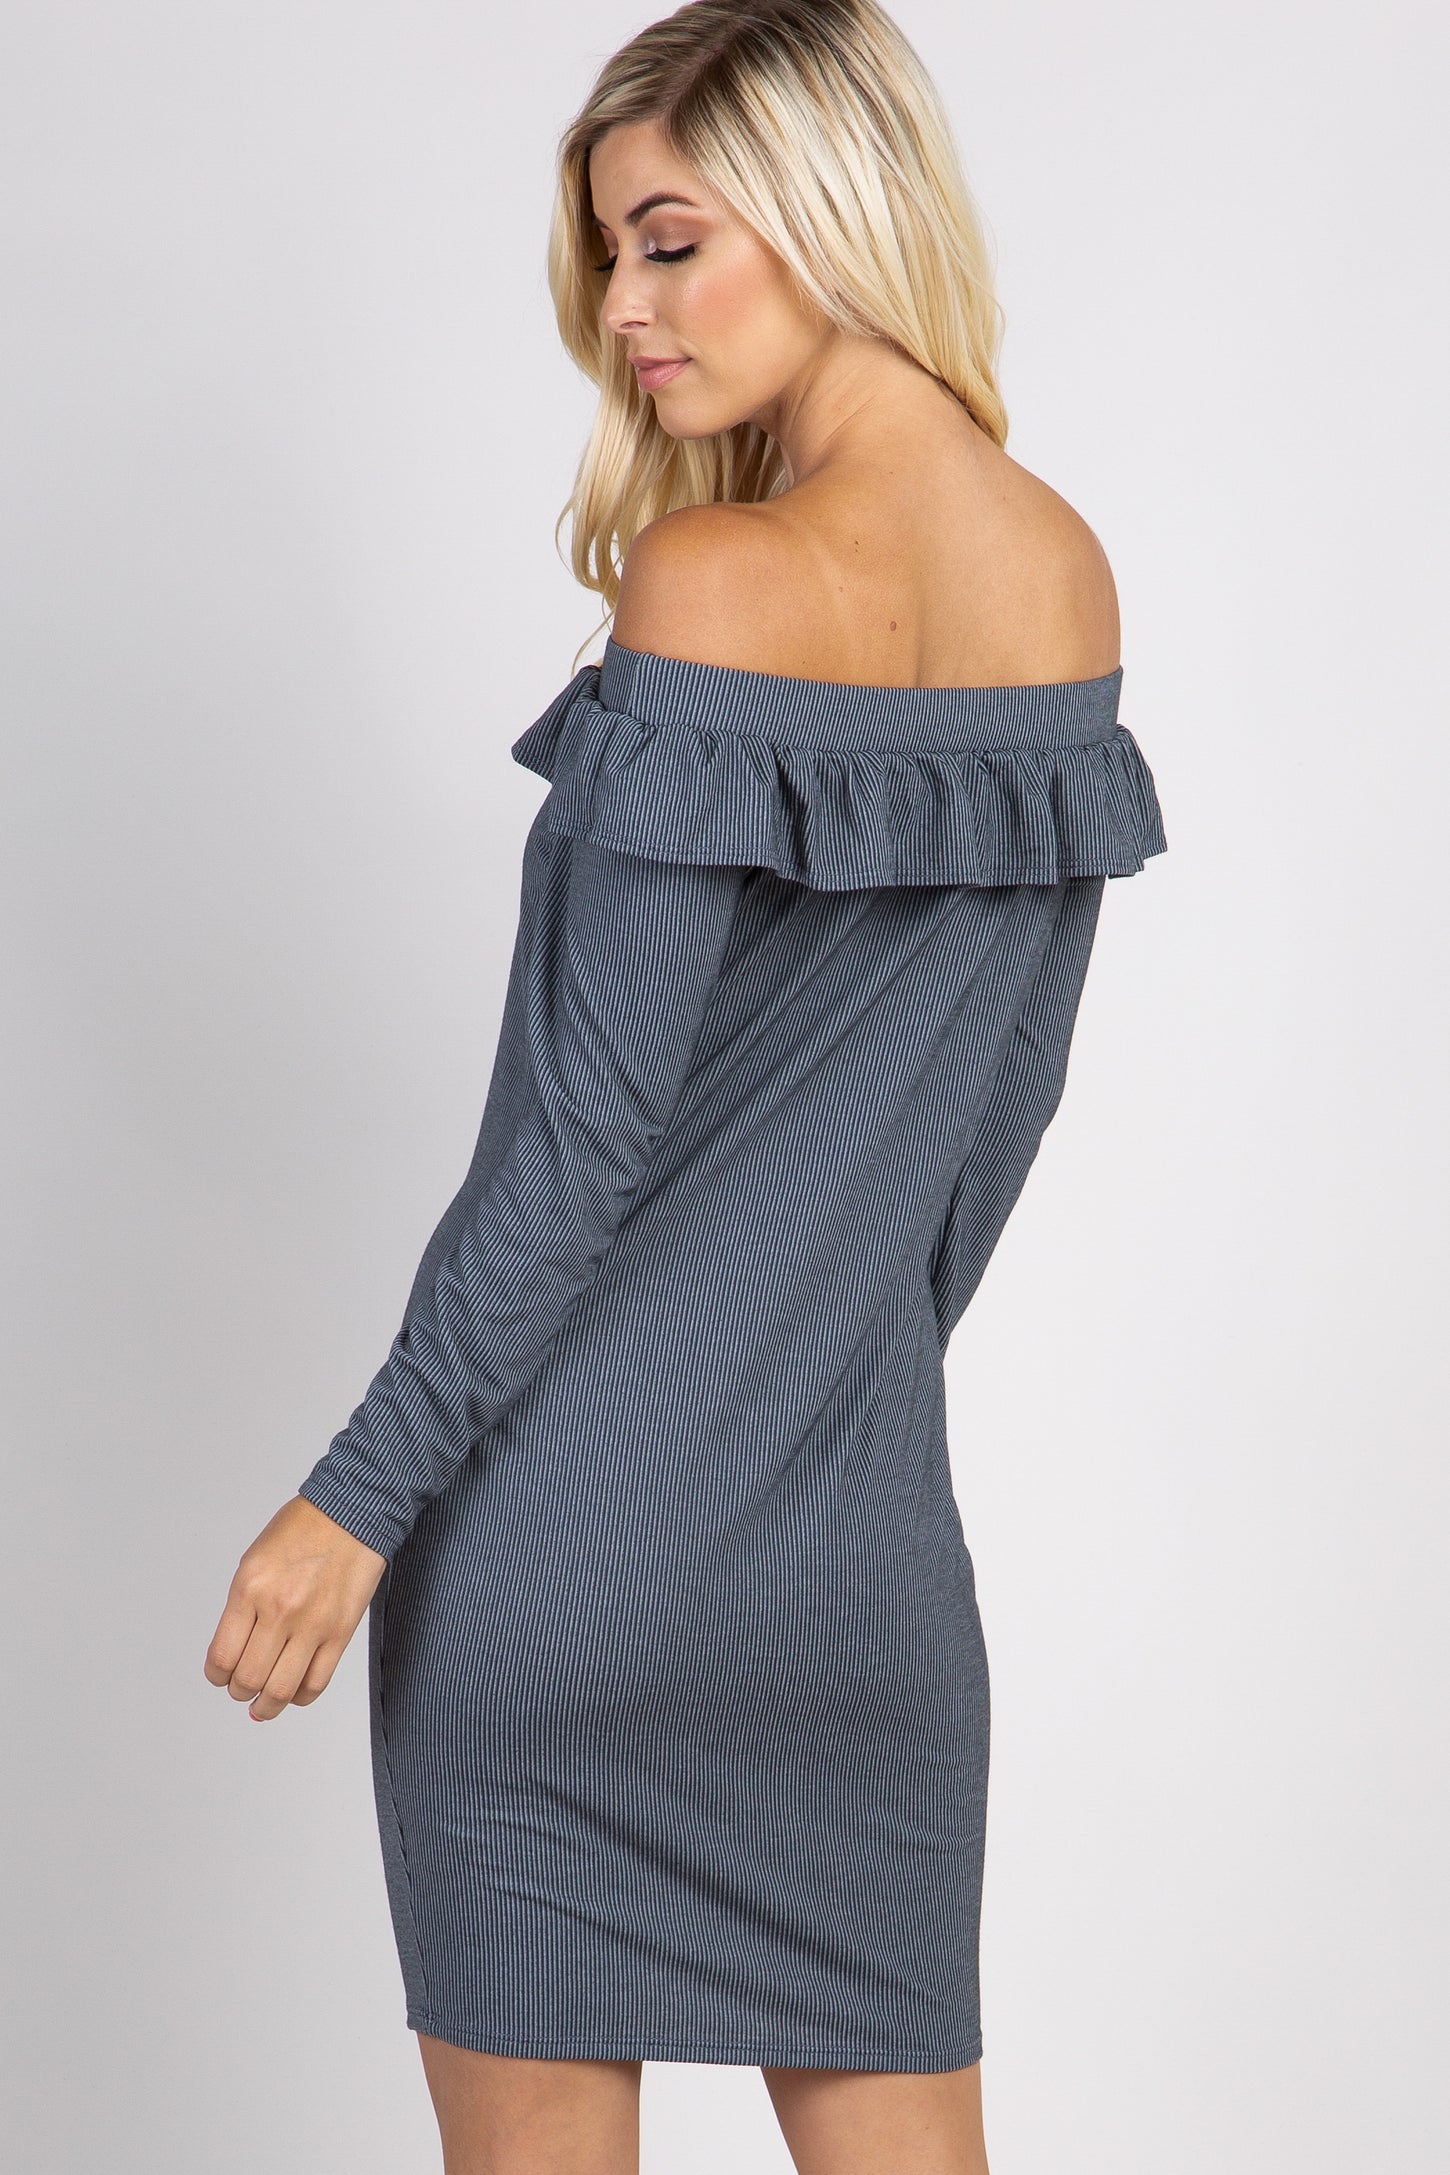 Charcoal Pinstriped Off Shoulder Ruffle Accent Dress